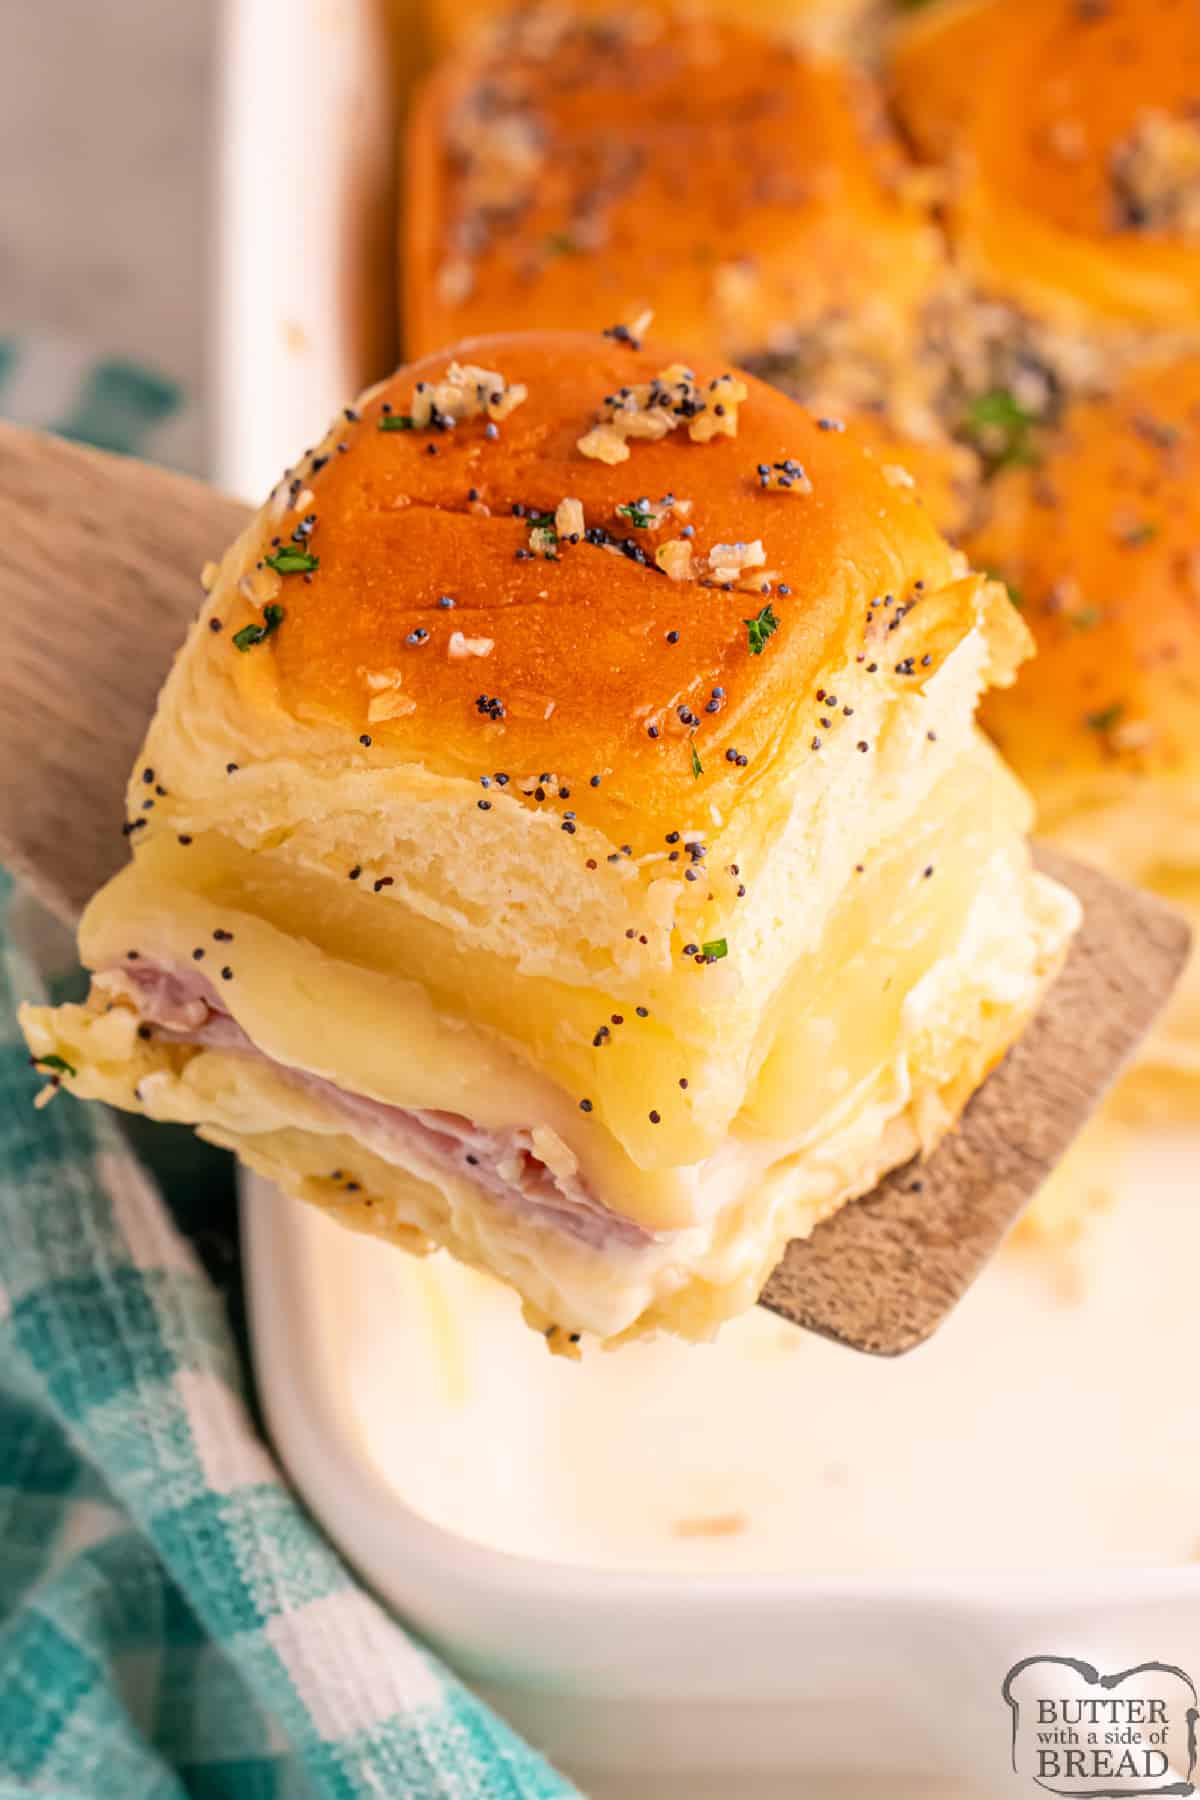 Slider with pineapple, ham, and cheese.